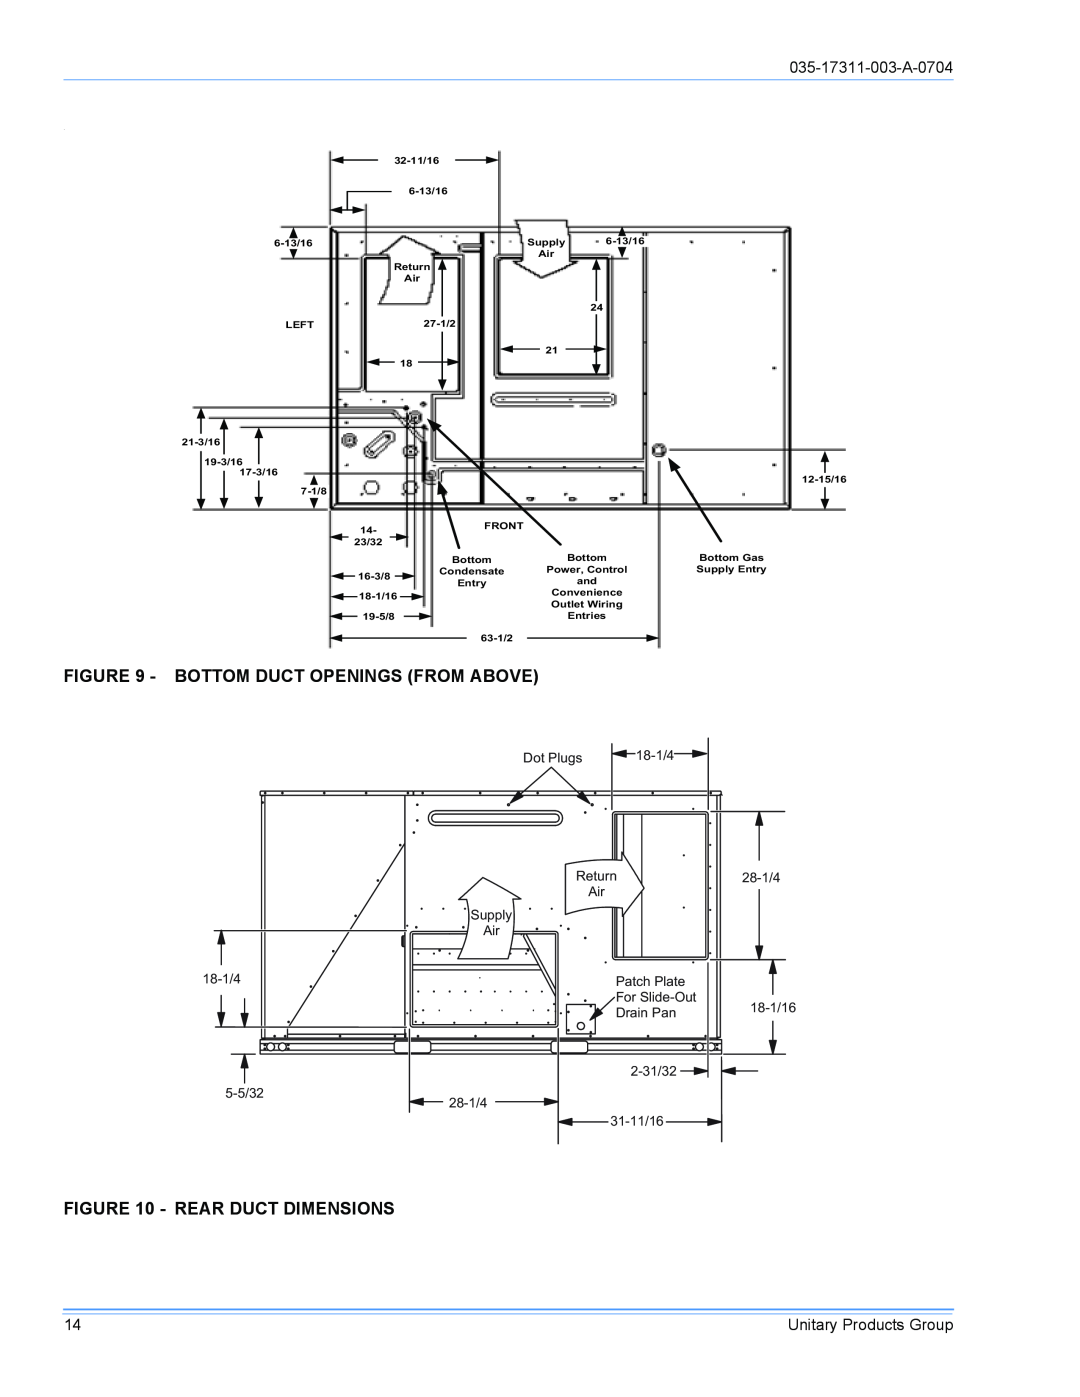 York DM090 installation manual Bottom Duct Openings From Above, Rear Duct Dimensions, 035-17311-003-A-0704 